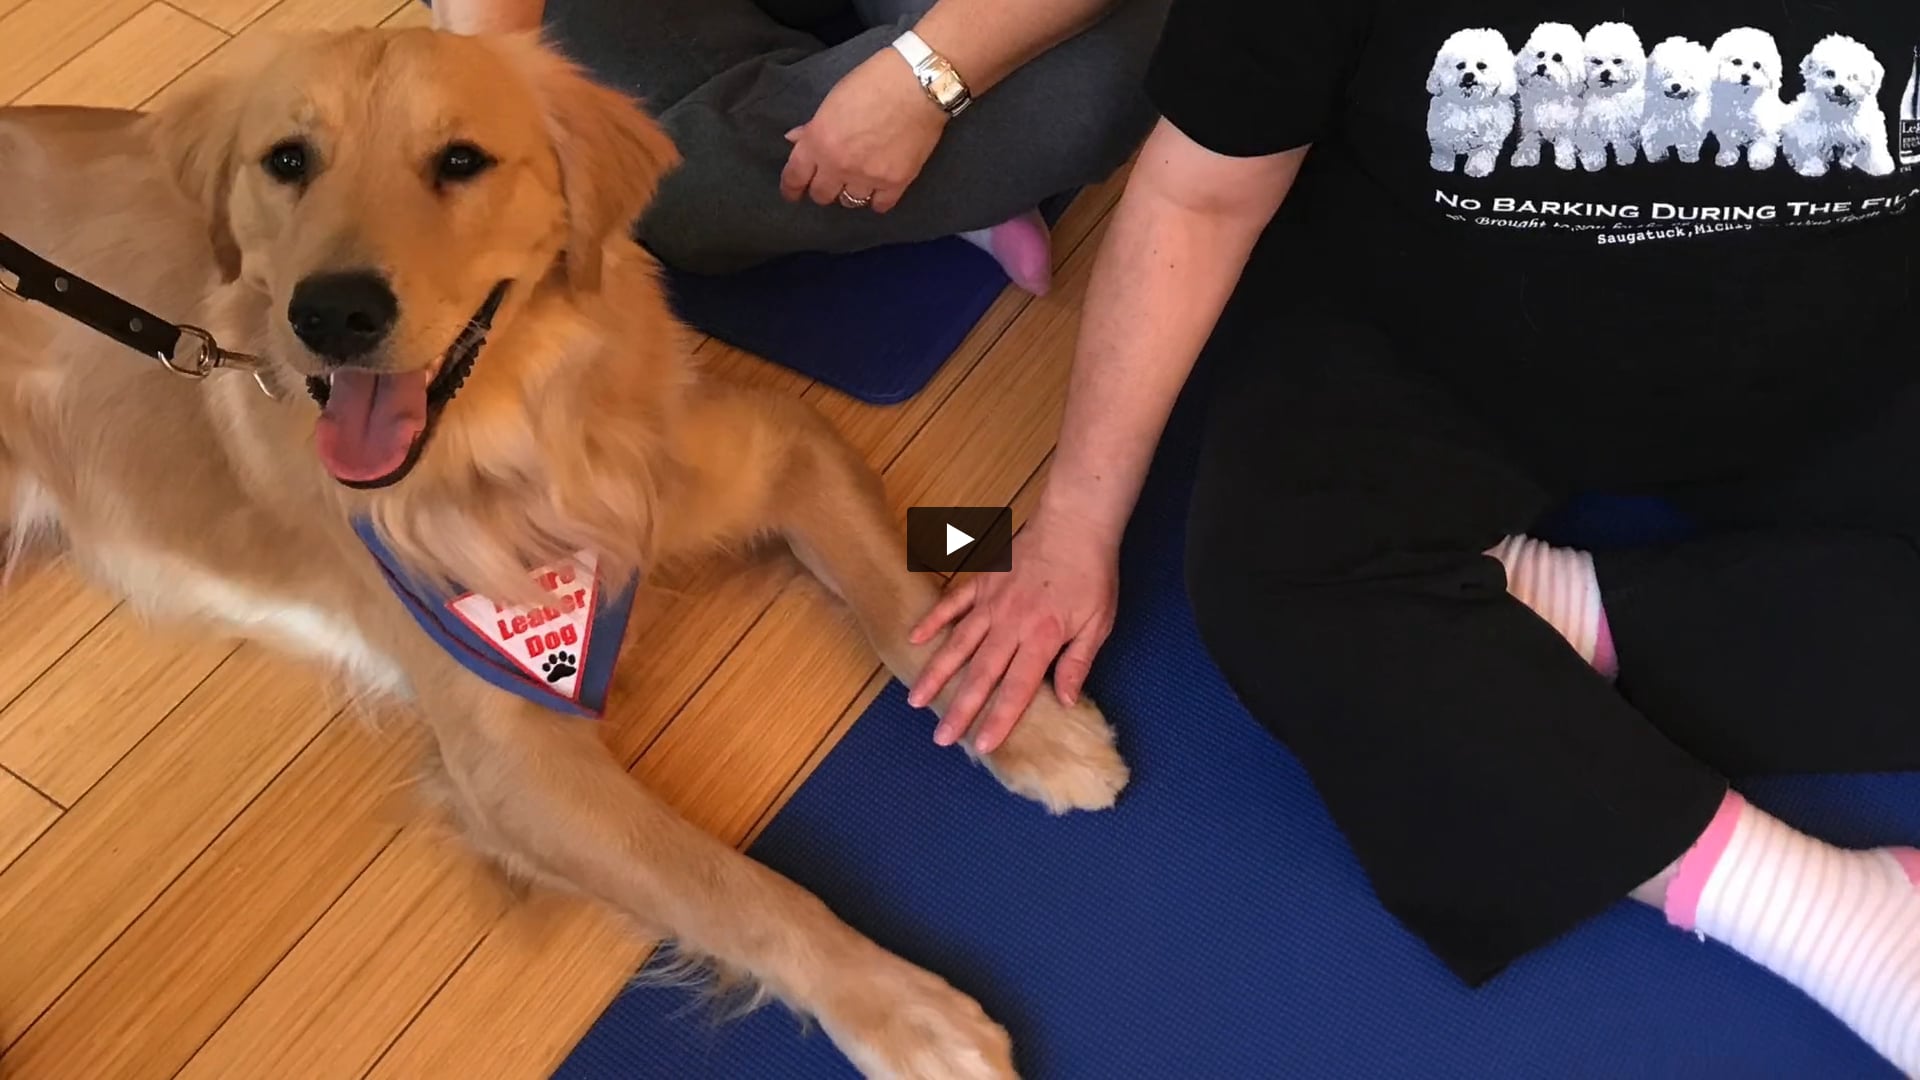 UpDog Yoga & Leader Dogs for the Blind "Puppy Love Yoga" Video